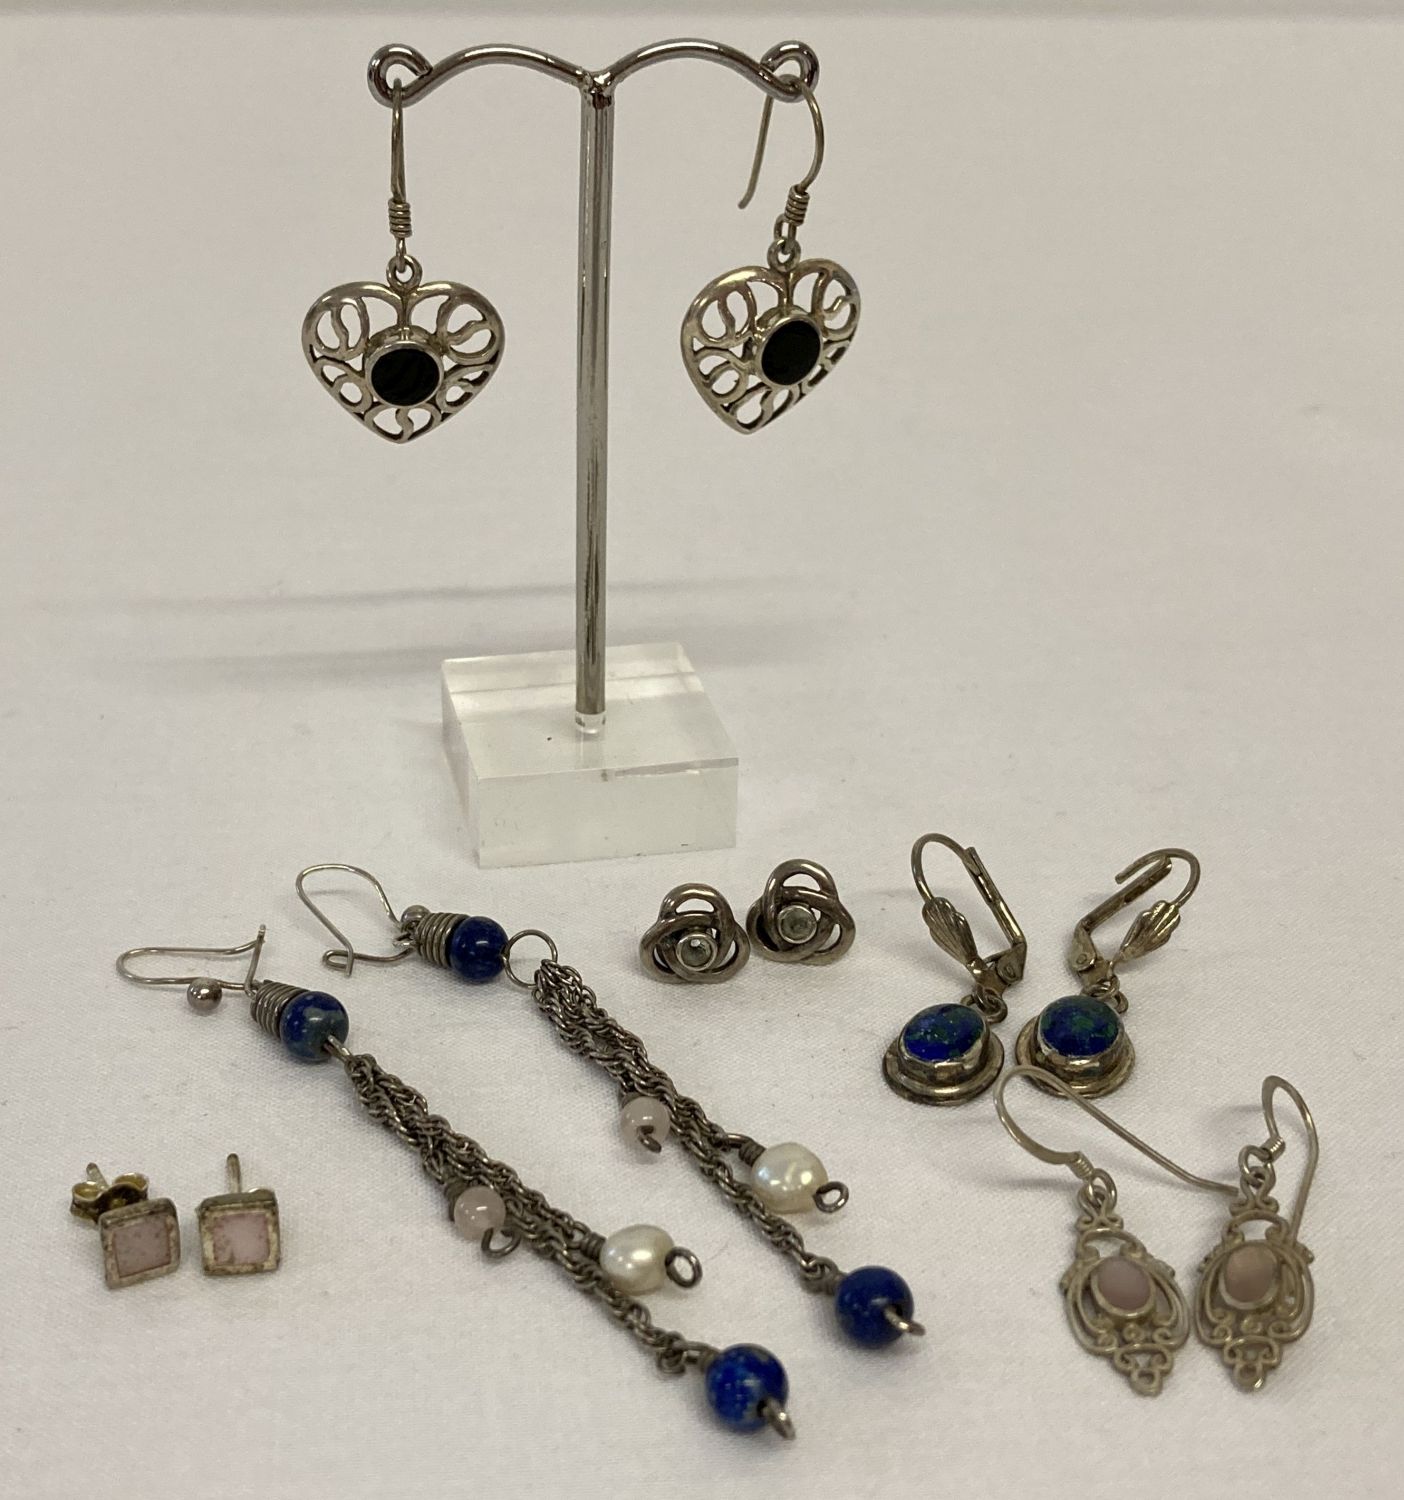 5 pairs of silver and white metal earrings in both drop and stud styles.